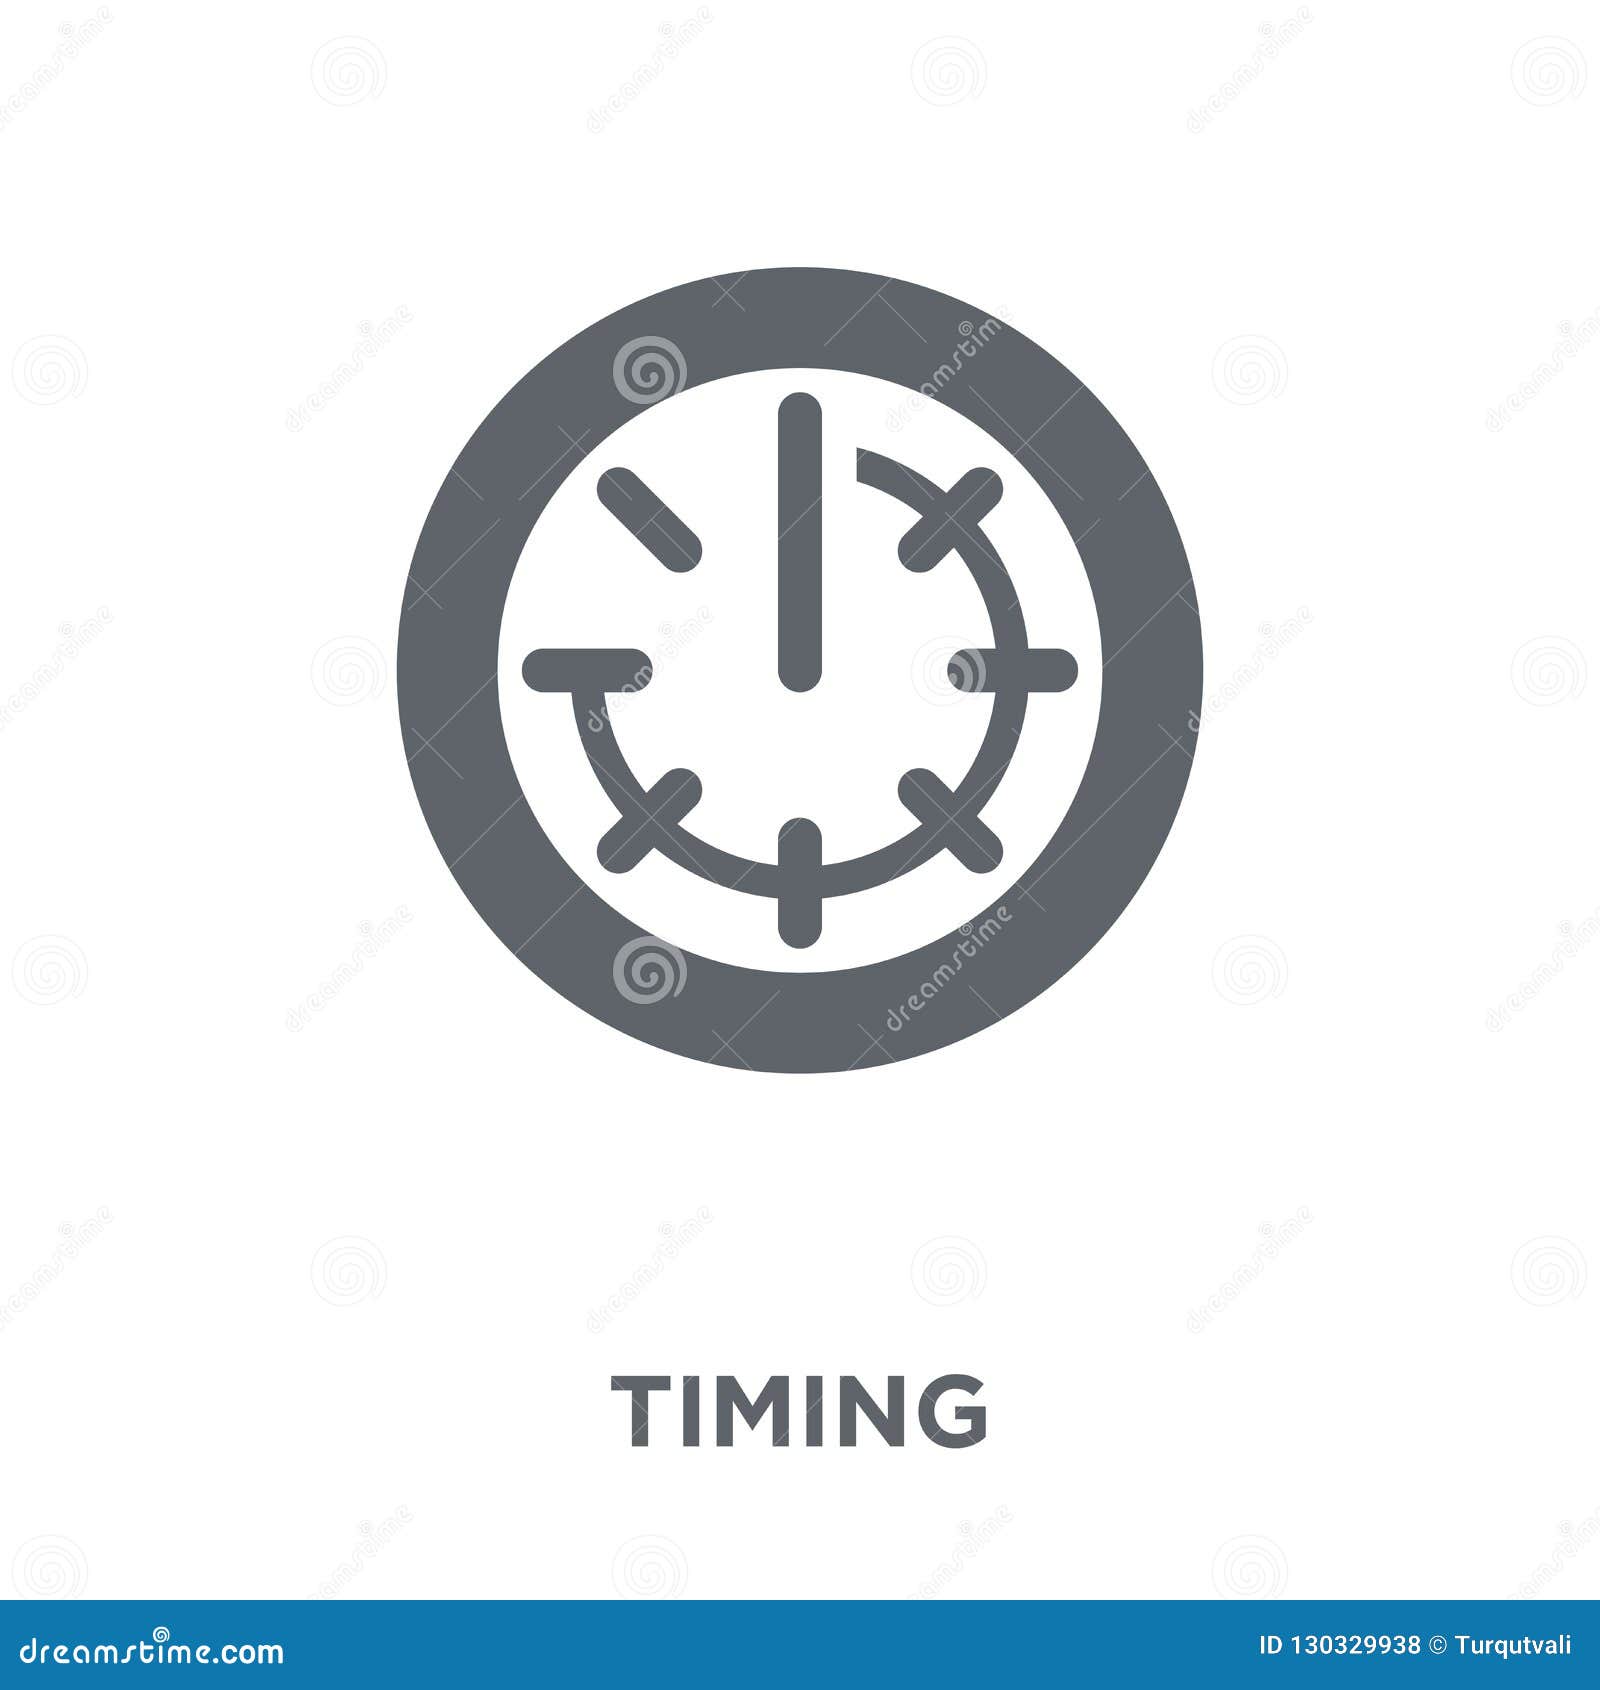 timing icon from time managemnet collection.